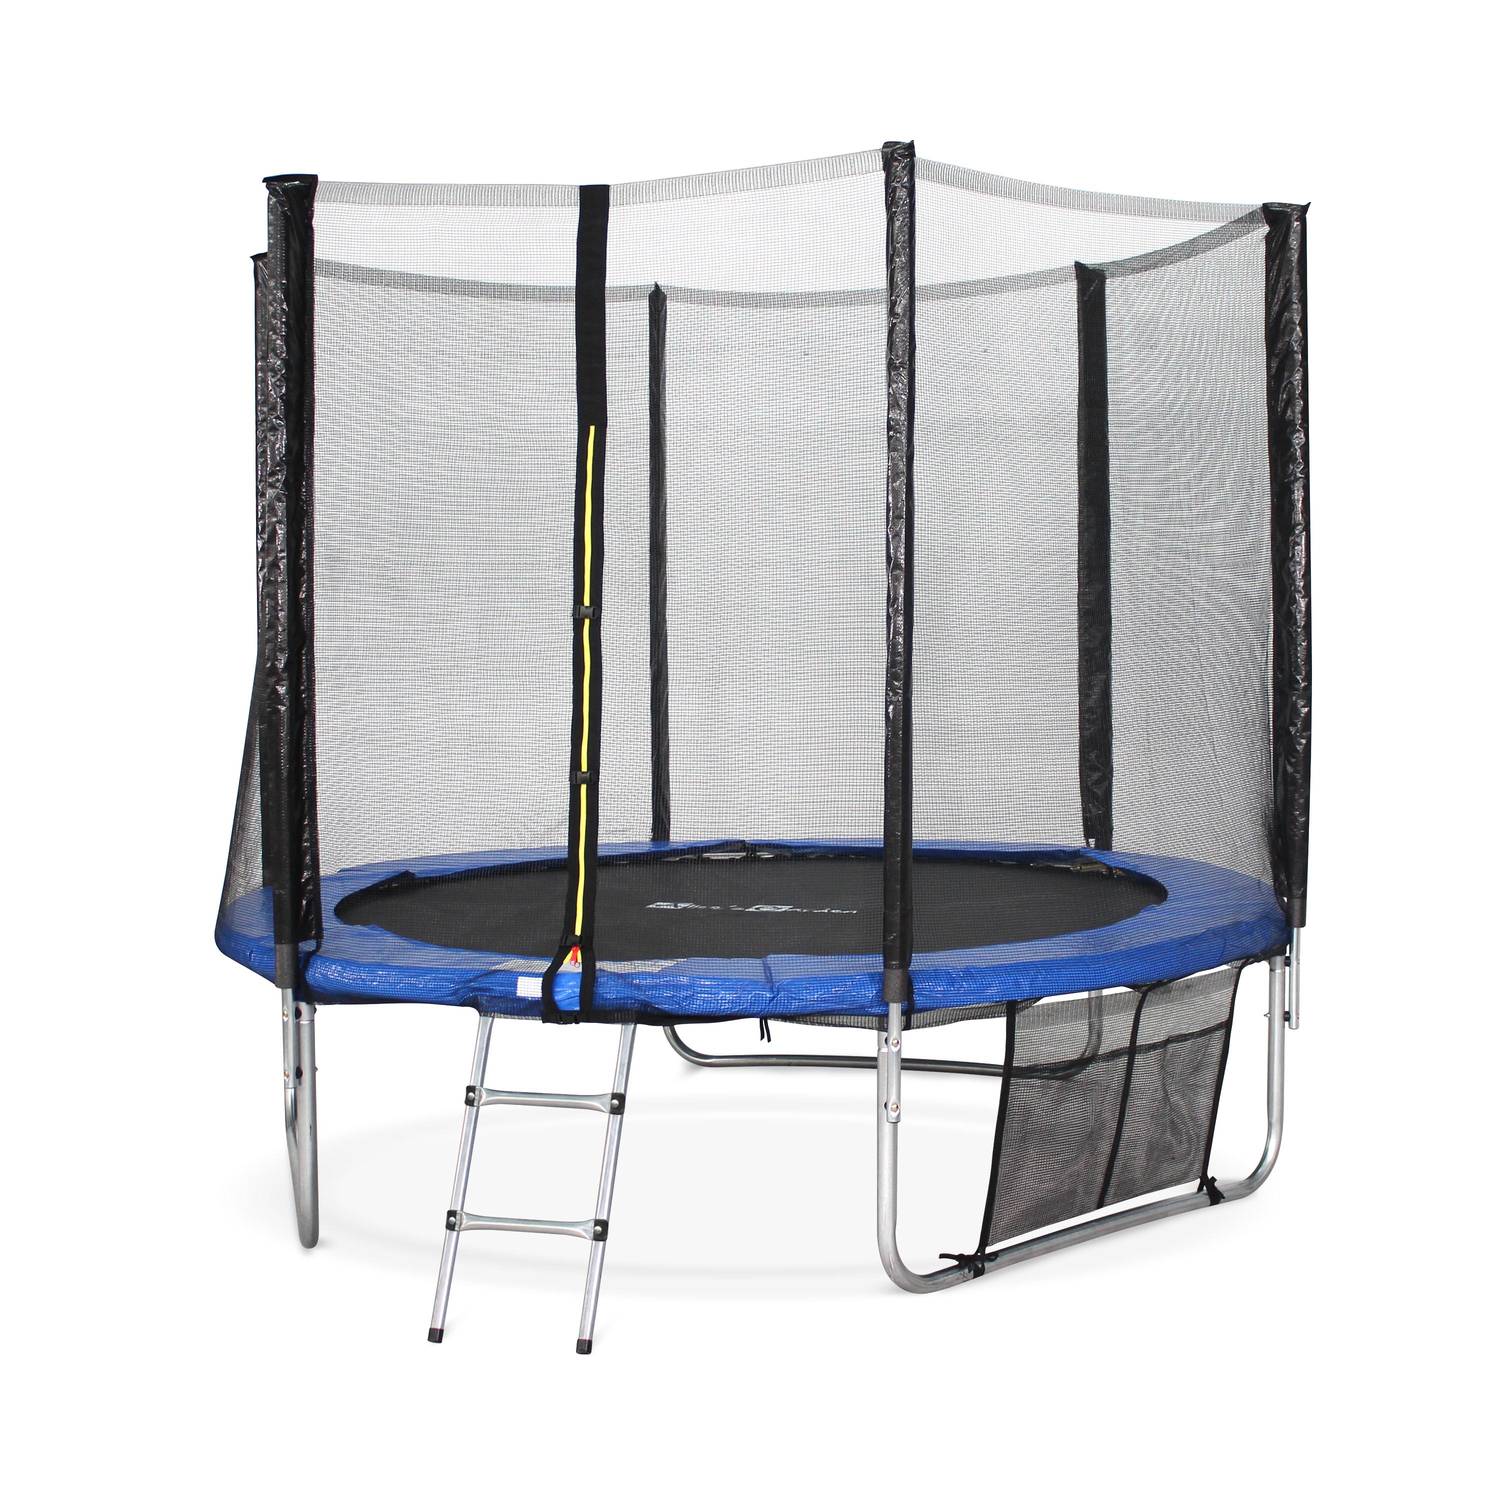 8ft trampoline with safety net and accessory kit - Ø250cm - Pluton Photo2